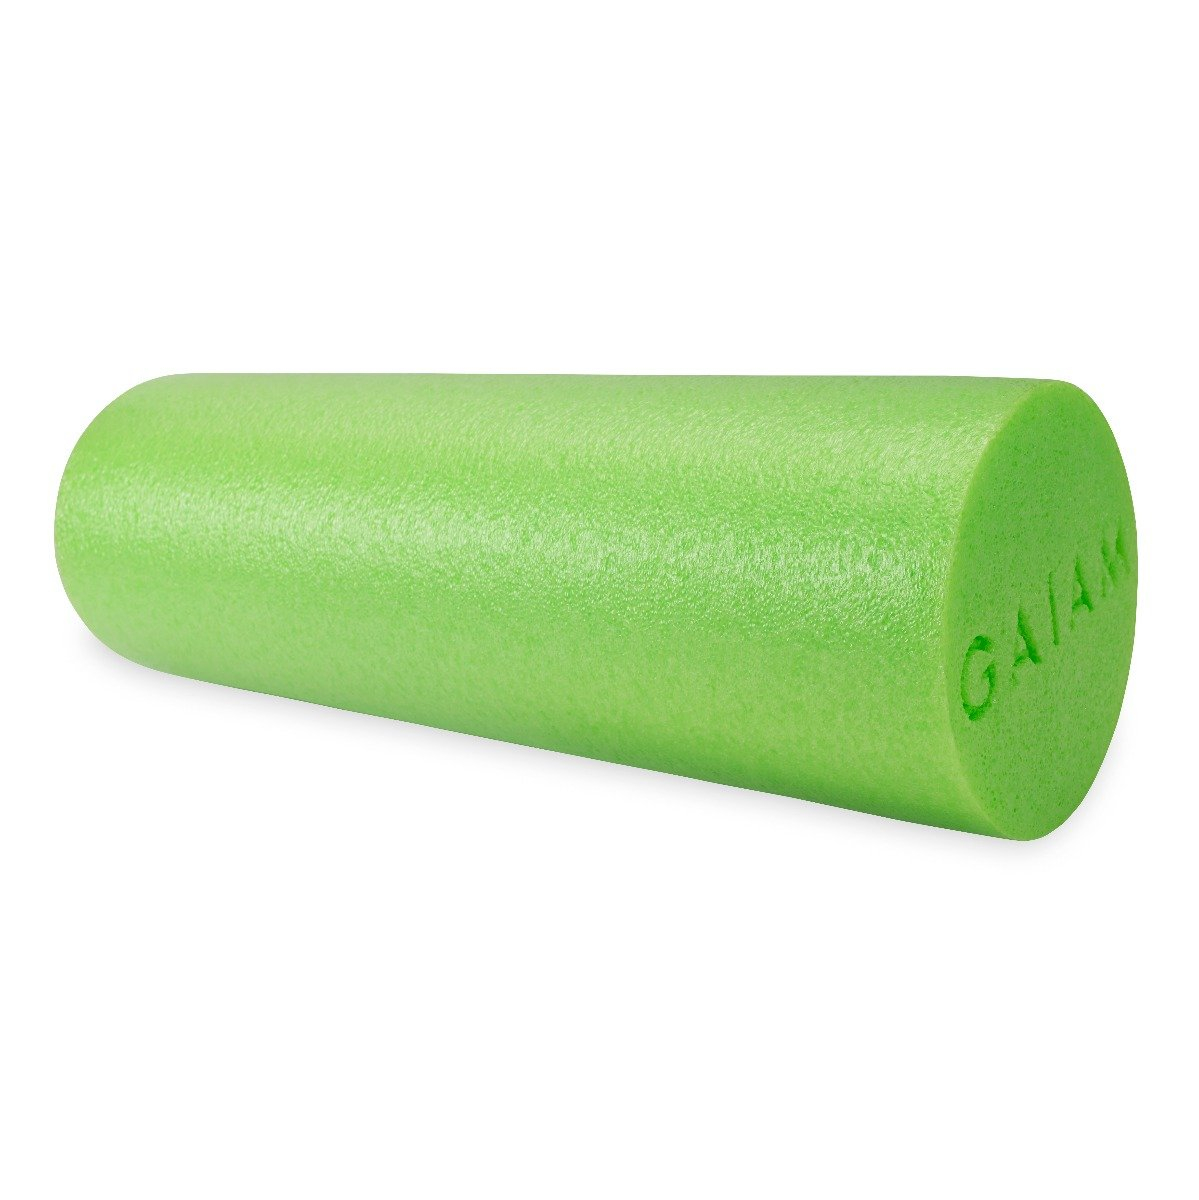 Gaiam Muscle Therapy Foam Roller